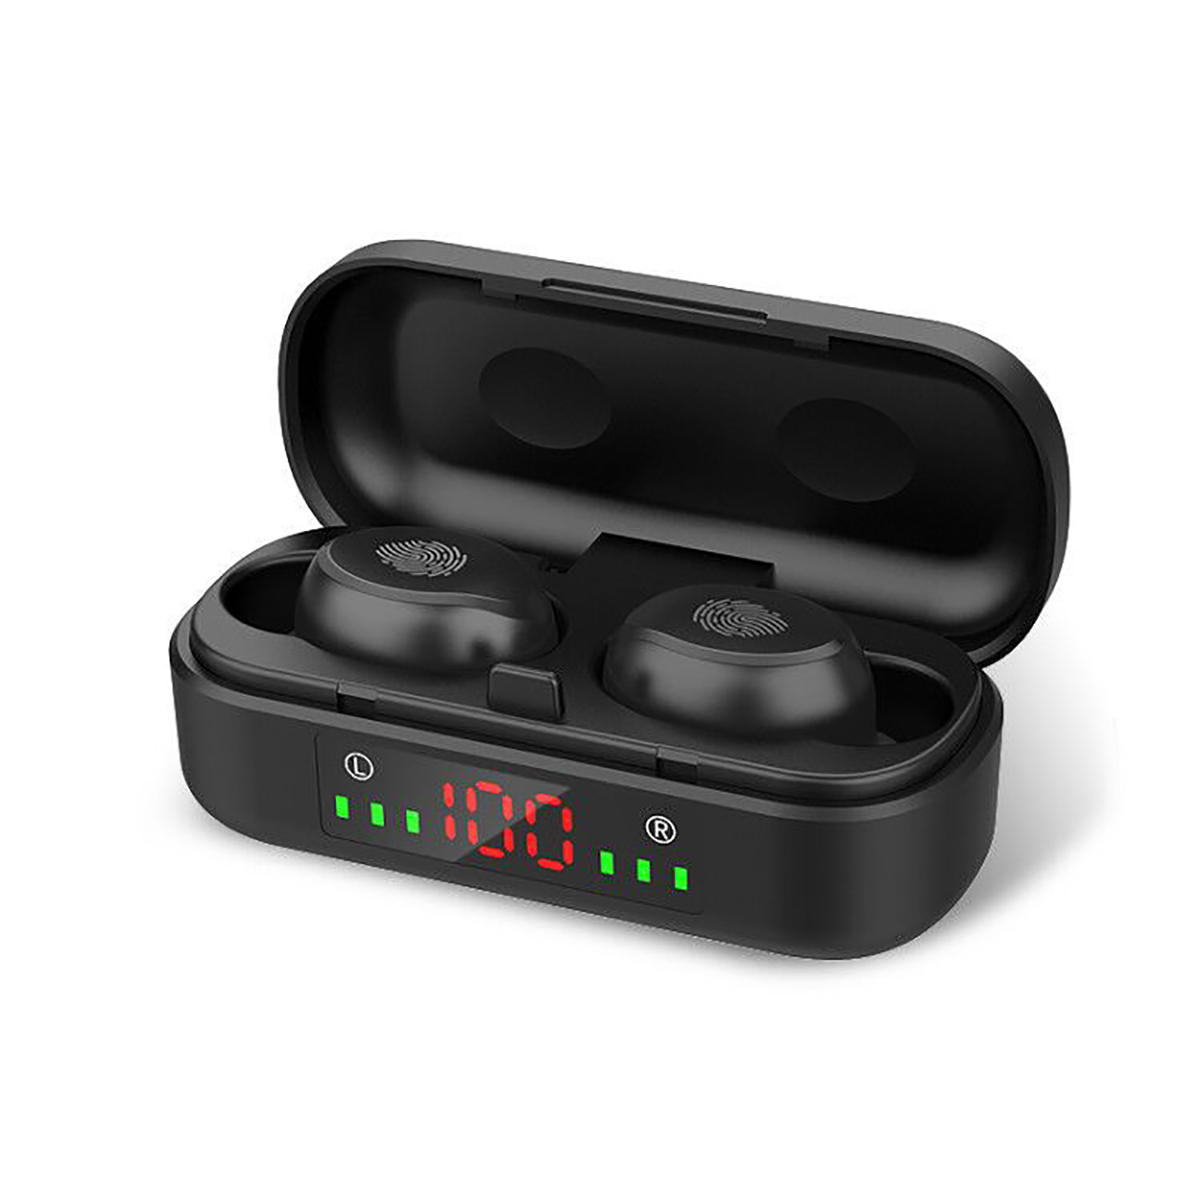 

Bakeey V8 TWS bluetooth 5.0 Earphone Mini Touch Control LED Display Headphone IPX7 Waterproof Earbuds with Mic